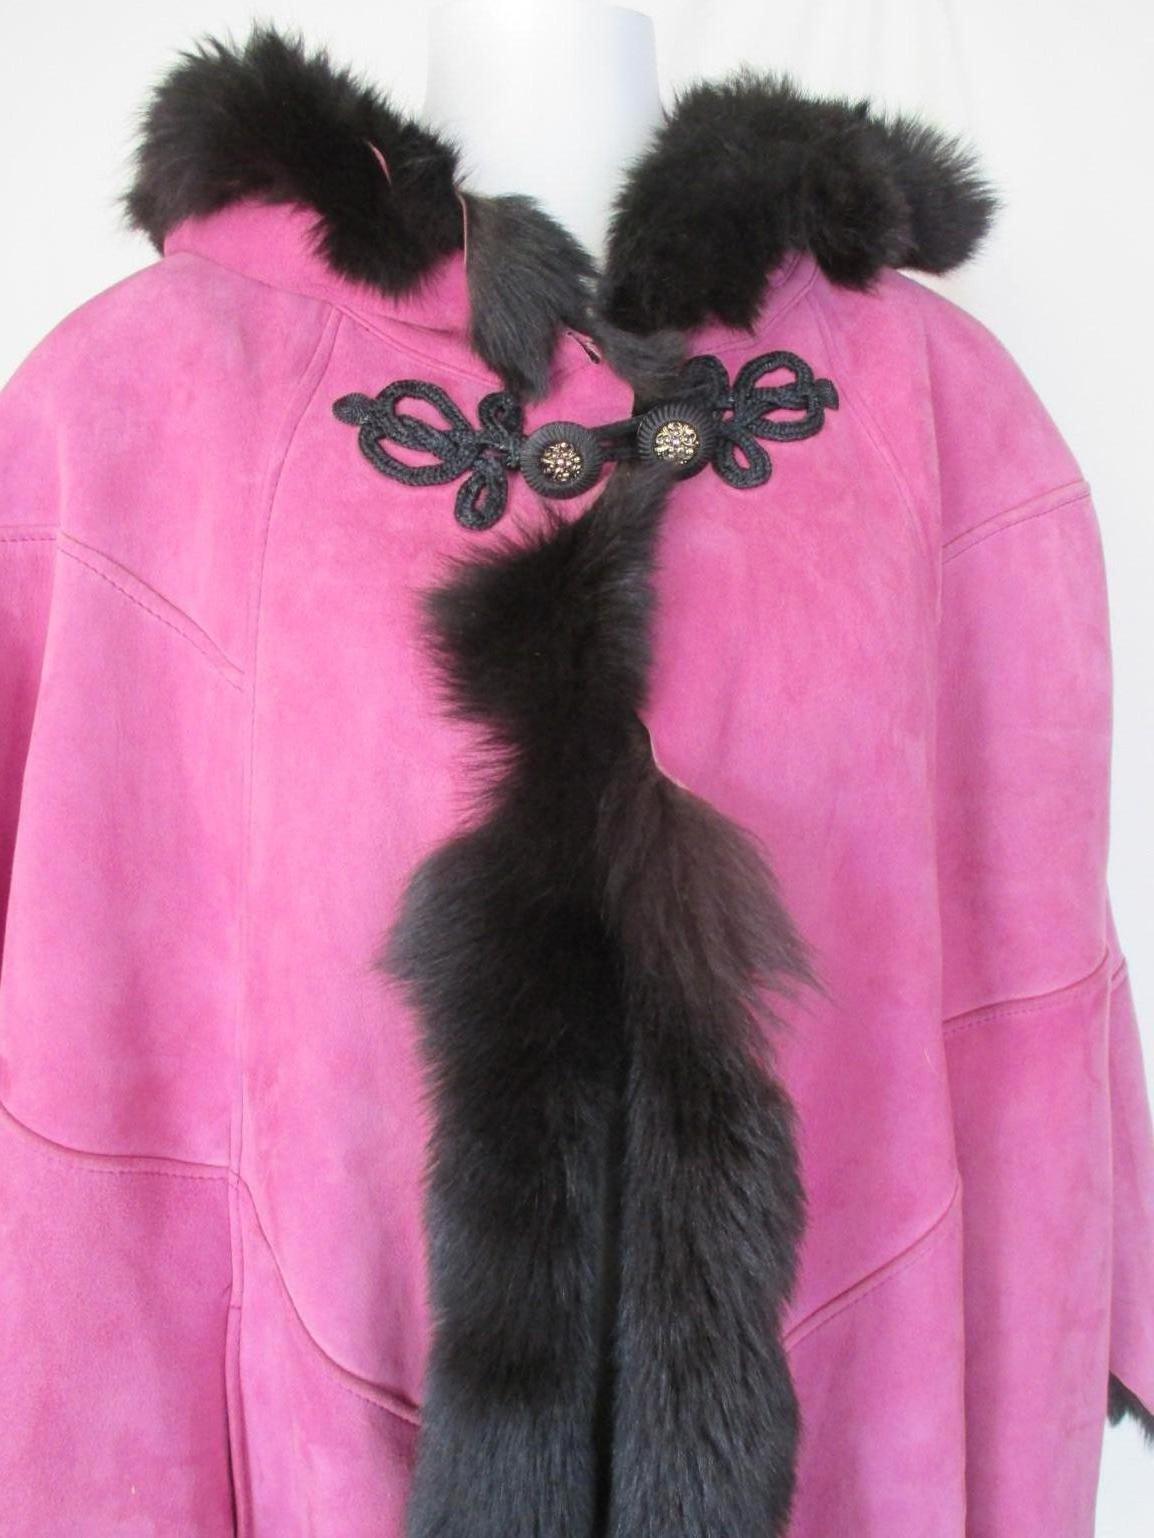 This hooded soft suede leather cape with sleeves, 1 closing hook and 2 pockets, is very warm and comfortable to wear.
Color is pink outside/black inside, made in Italy.
This cape is in pre owned condition.
Size is M/L 

note that vintage items are